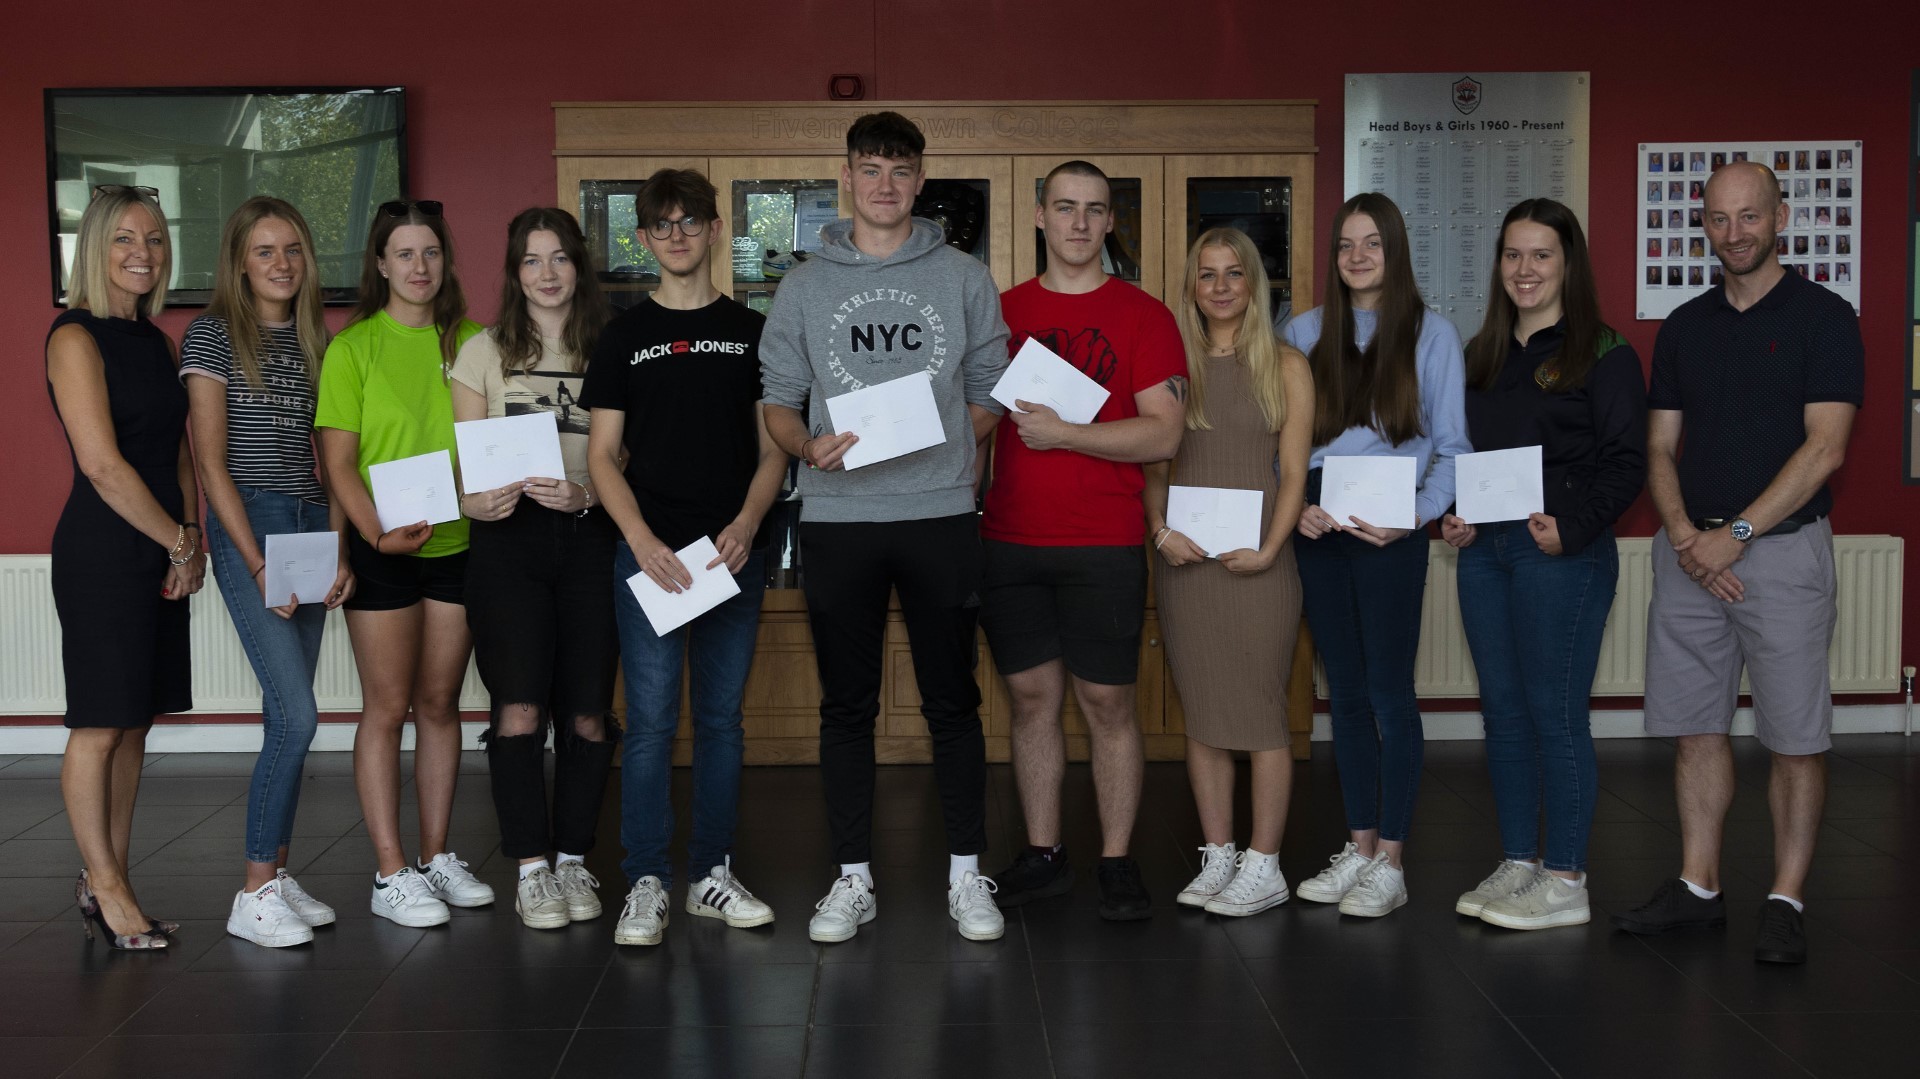 Year 14 students at Fivemiletown College receive their A-Level results. Pictured from left: Principal Janice Allen, Jessica McKeown, Sophie Moore, Robyn Little, Ryan Burgess, Matthew Clarke, Alexis Baranovskis, Rebecca Copeland, Amy McClung, Kaitlin